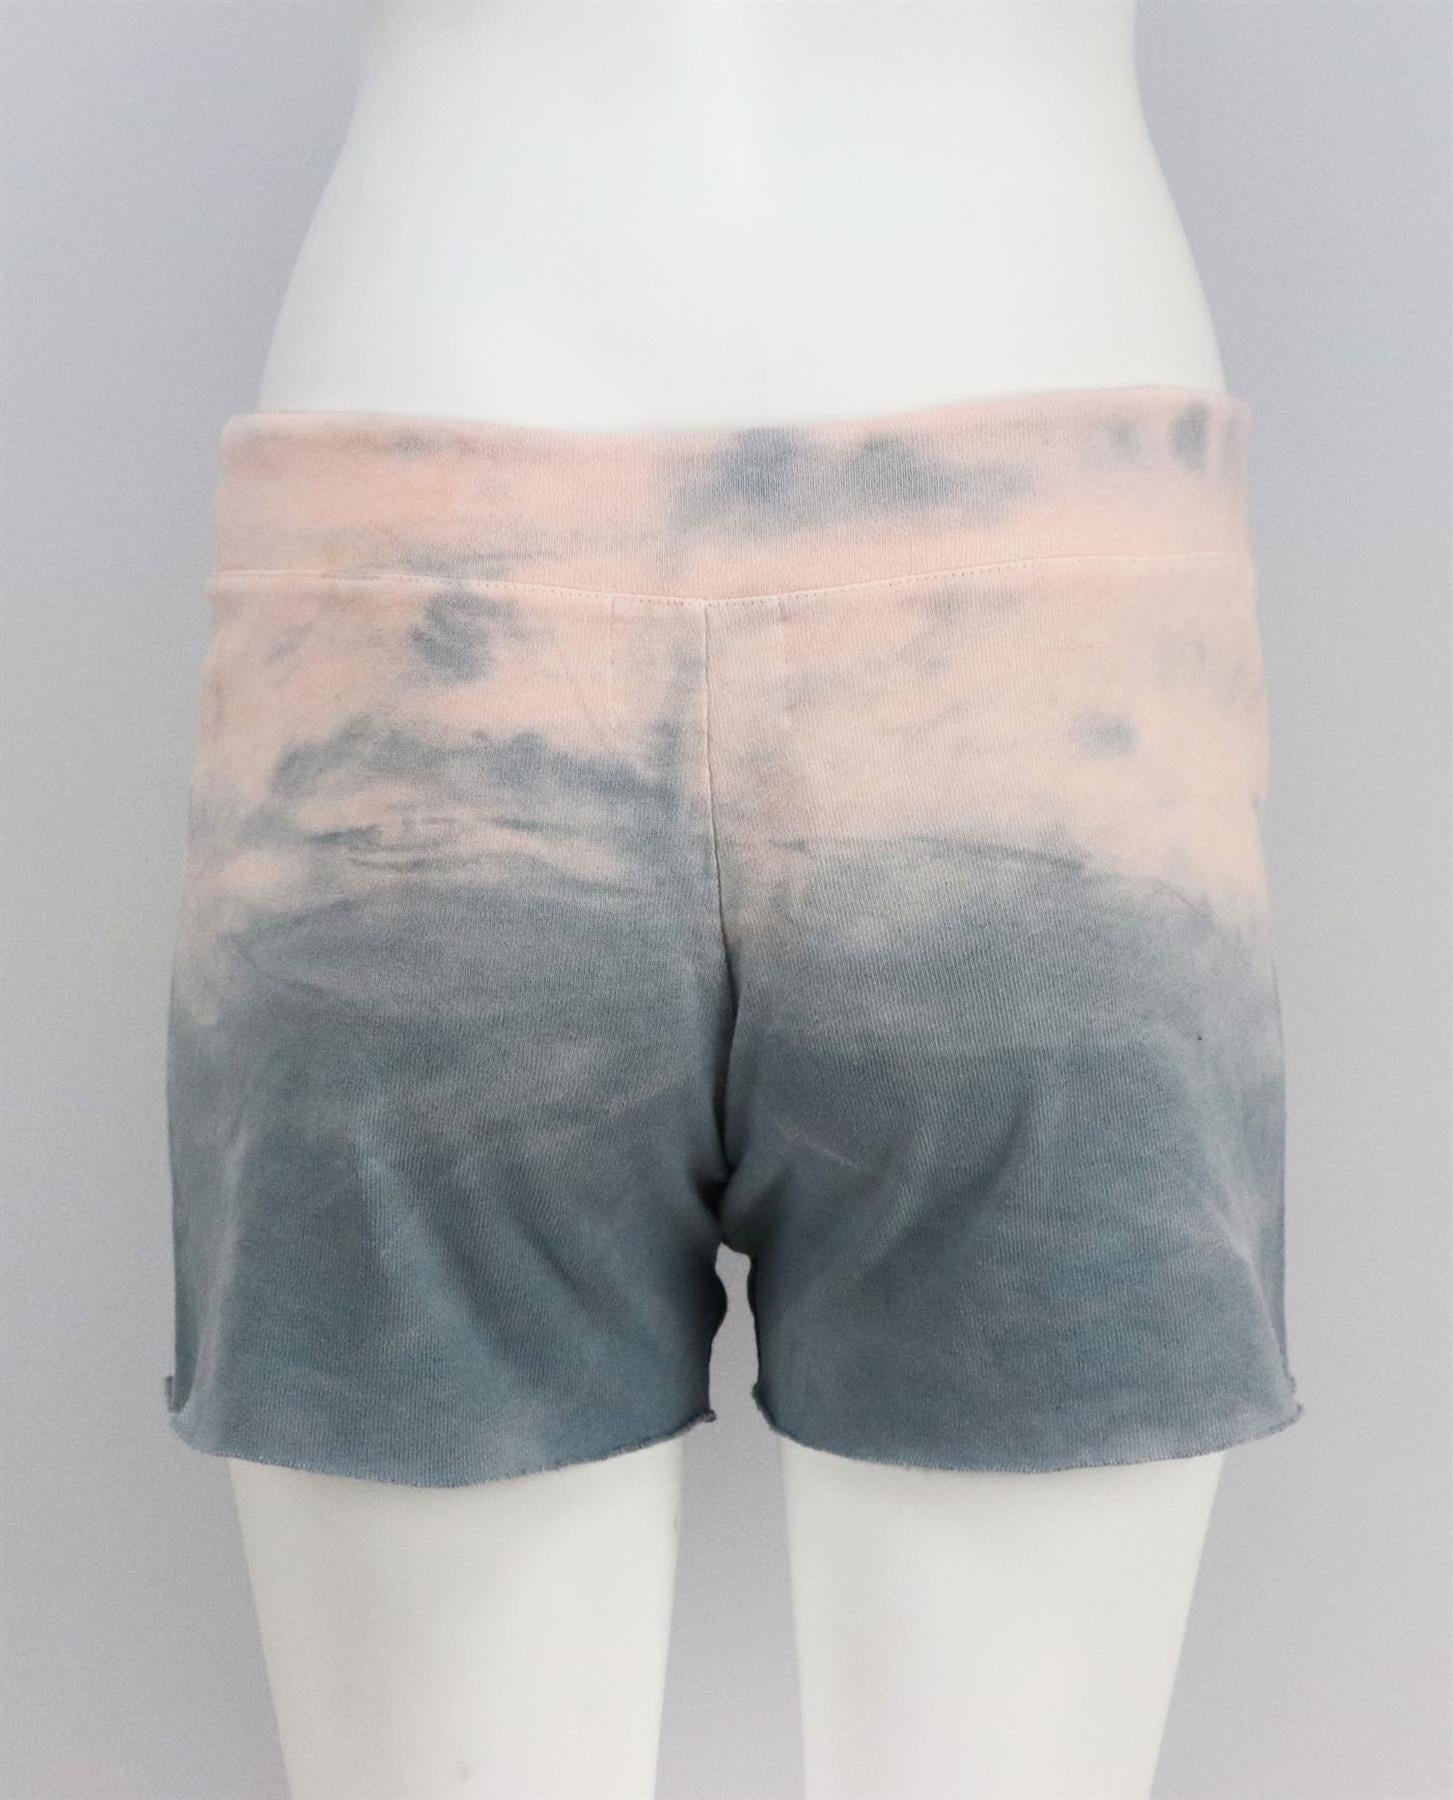 MONROW TIE DYED COTTON BLEND JERSEY SHORTS SMALL